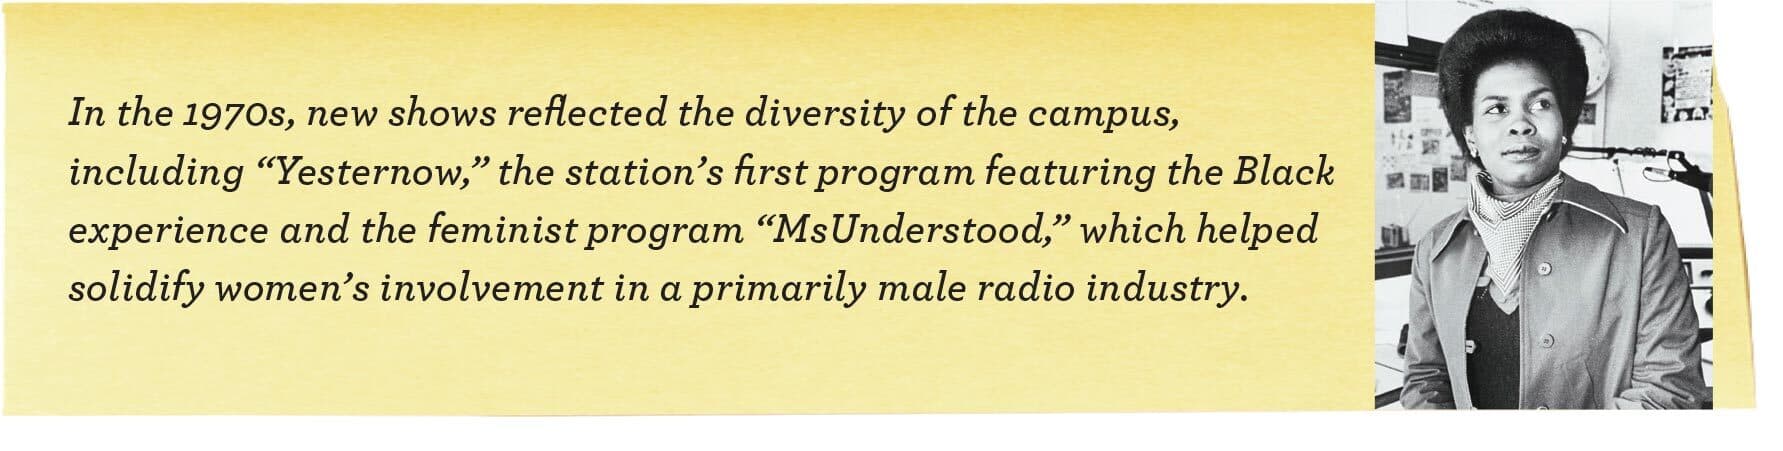 In the 1970s, new shows reflected the diversity of the campus, including “Yesternow,” the station’s first program featuring the Black experience and the feminist program “MsUnderstood,” which helped solidify women’s involvement in a primarily male radio industry.